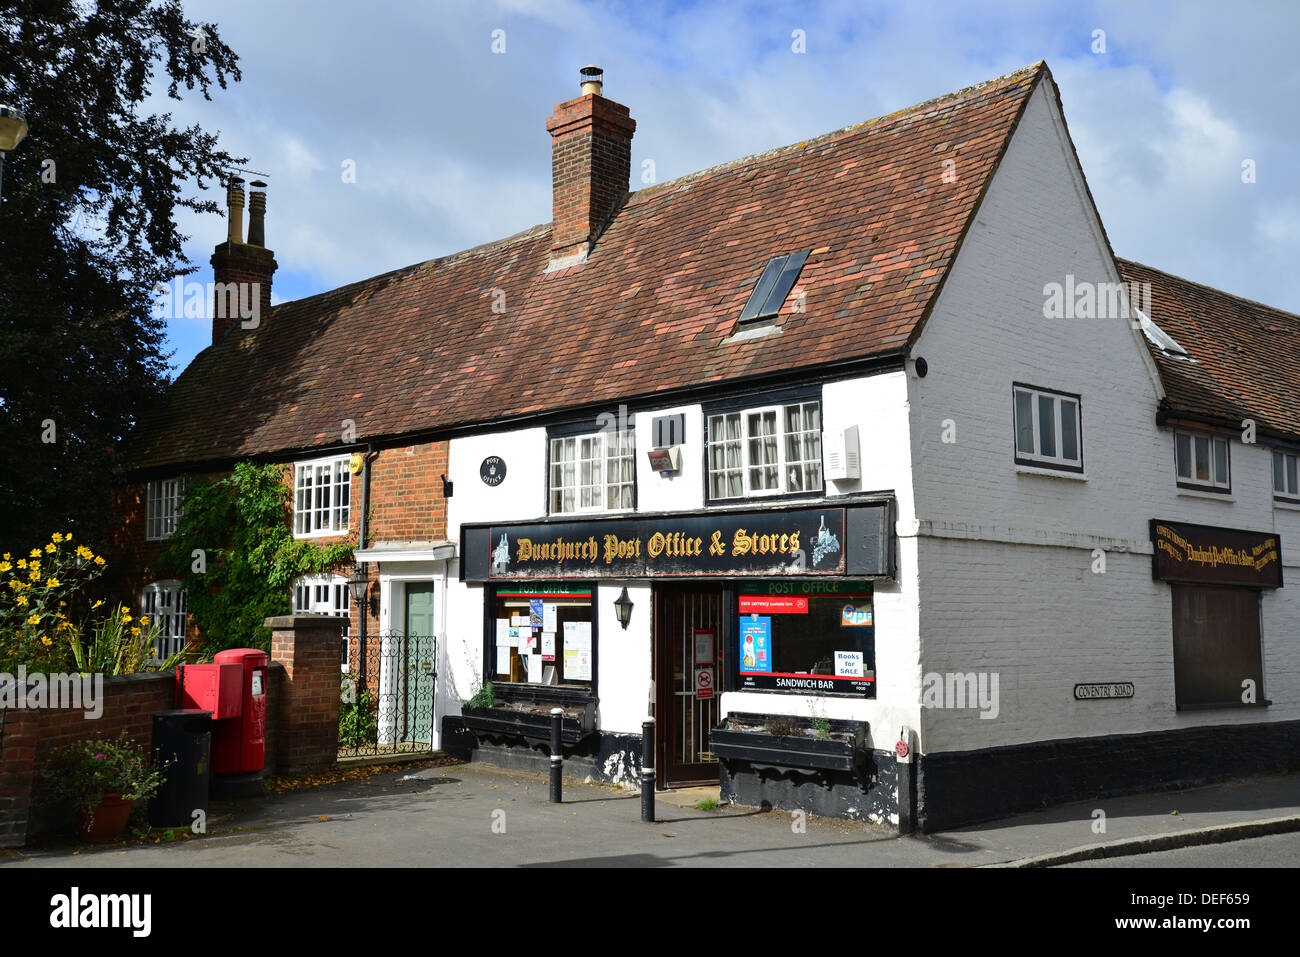 Dunchurch Post Office & Stores, Coventry Road, Dunchurch, Warwickshire, England, United Kingdom Stock Photo